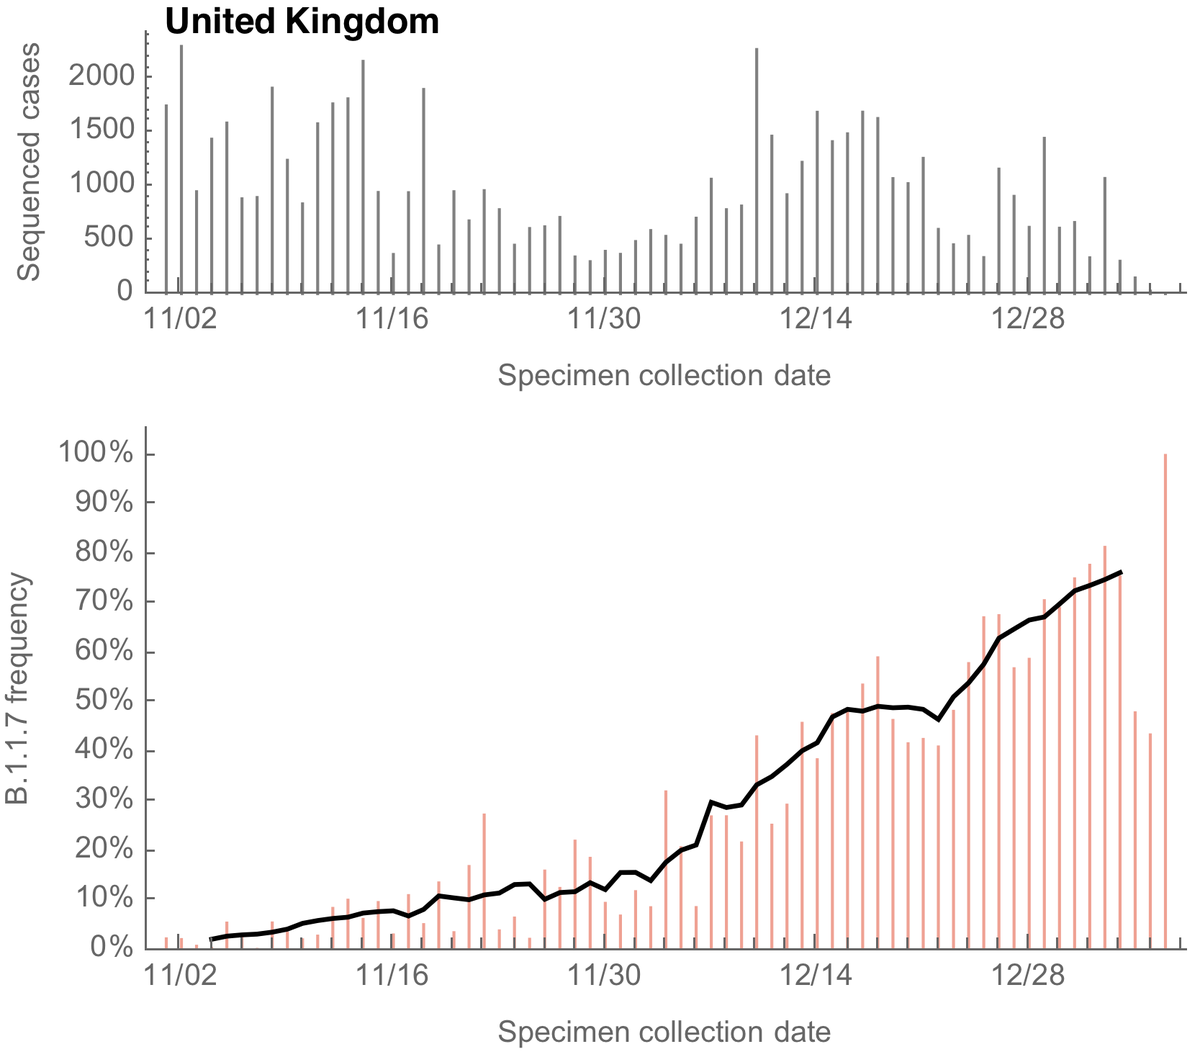 For the UK, we can see a steady increase in the frequency of sequenced variant viruses belonging to the B.1.1.7 lineage, reaching ~70% frequency at the end of December. Solid line is a 7 day sliding window average. 3/13